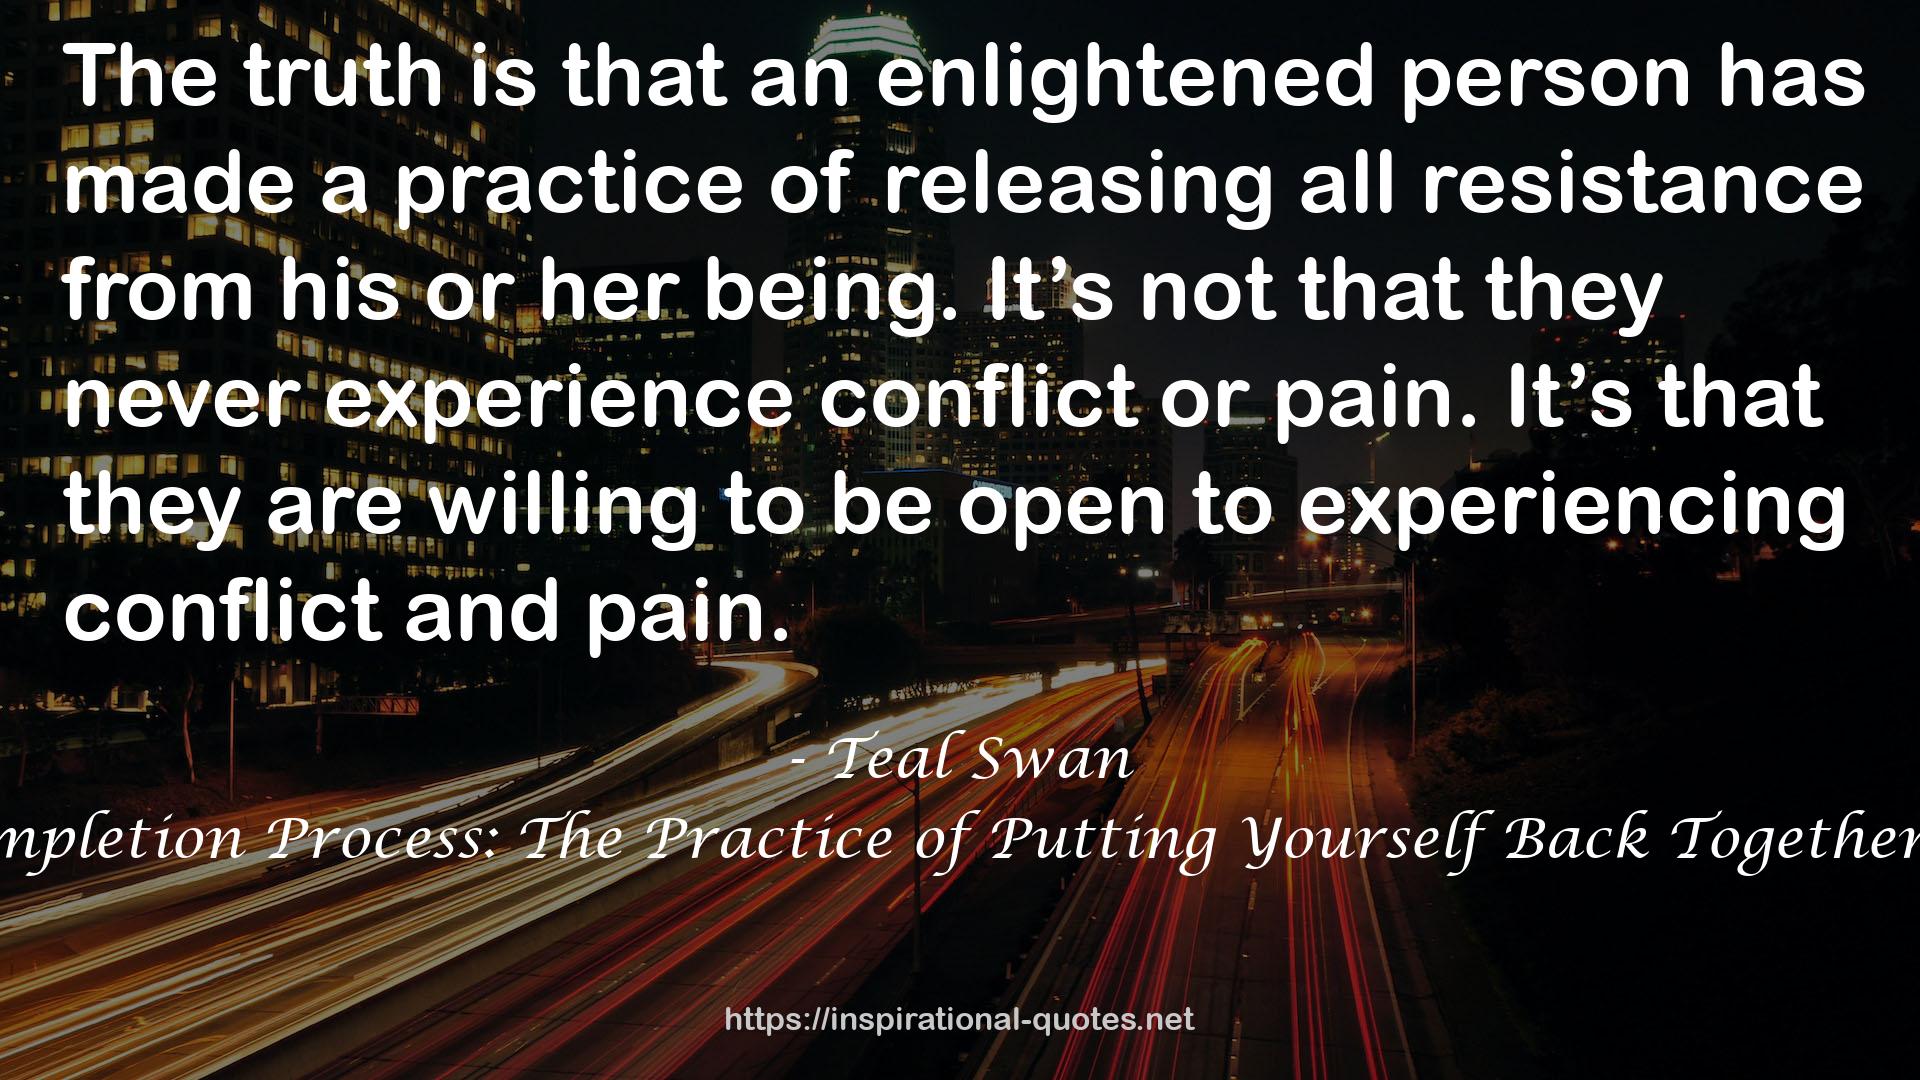 The Completion Process: The Practice of Putting Yourself Back Together Again QUOTES